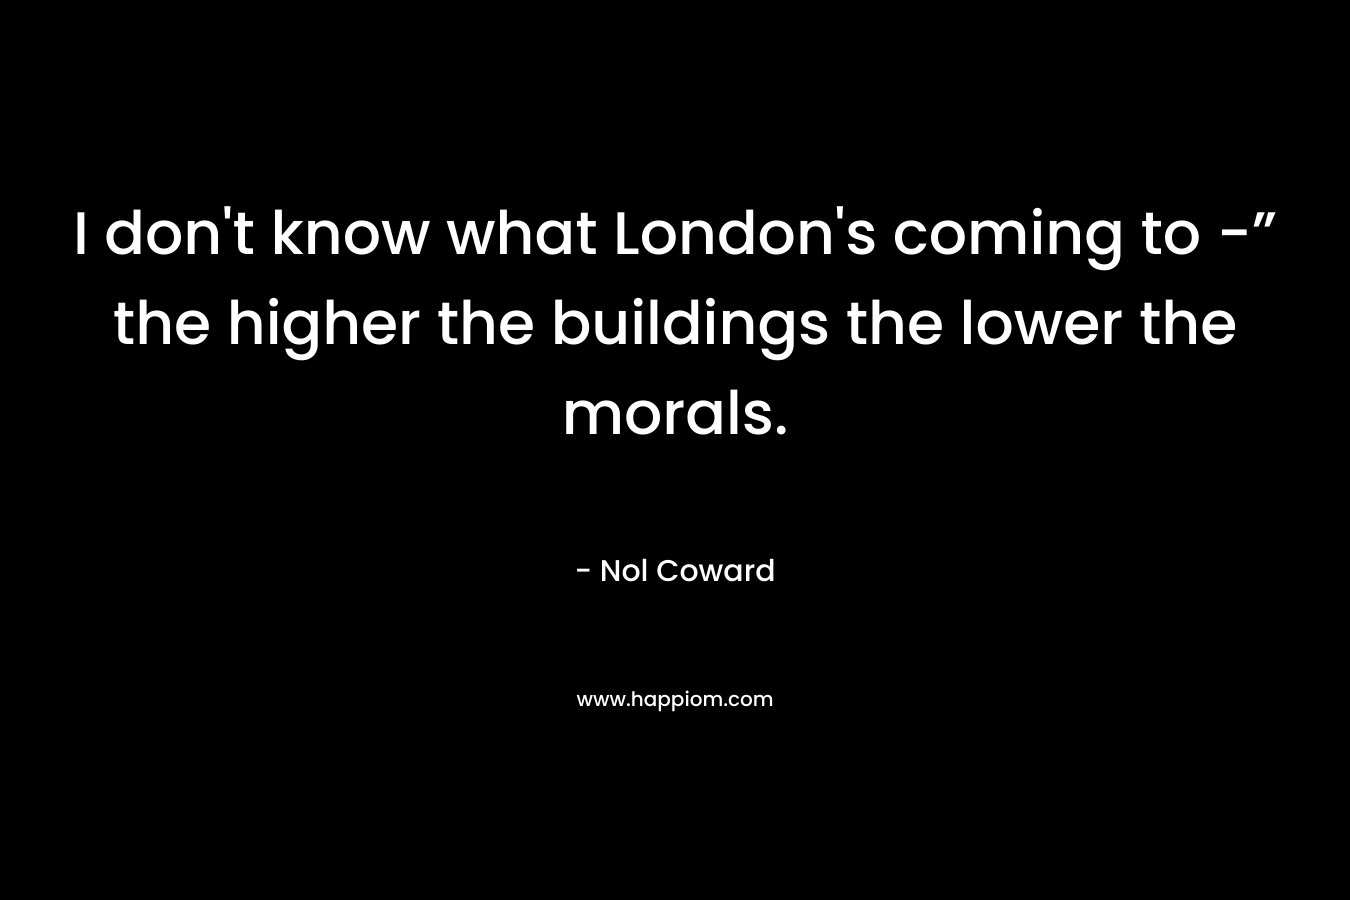 I don't know what London's coming to -” the higher the buildings the lower the morals.